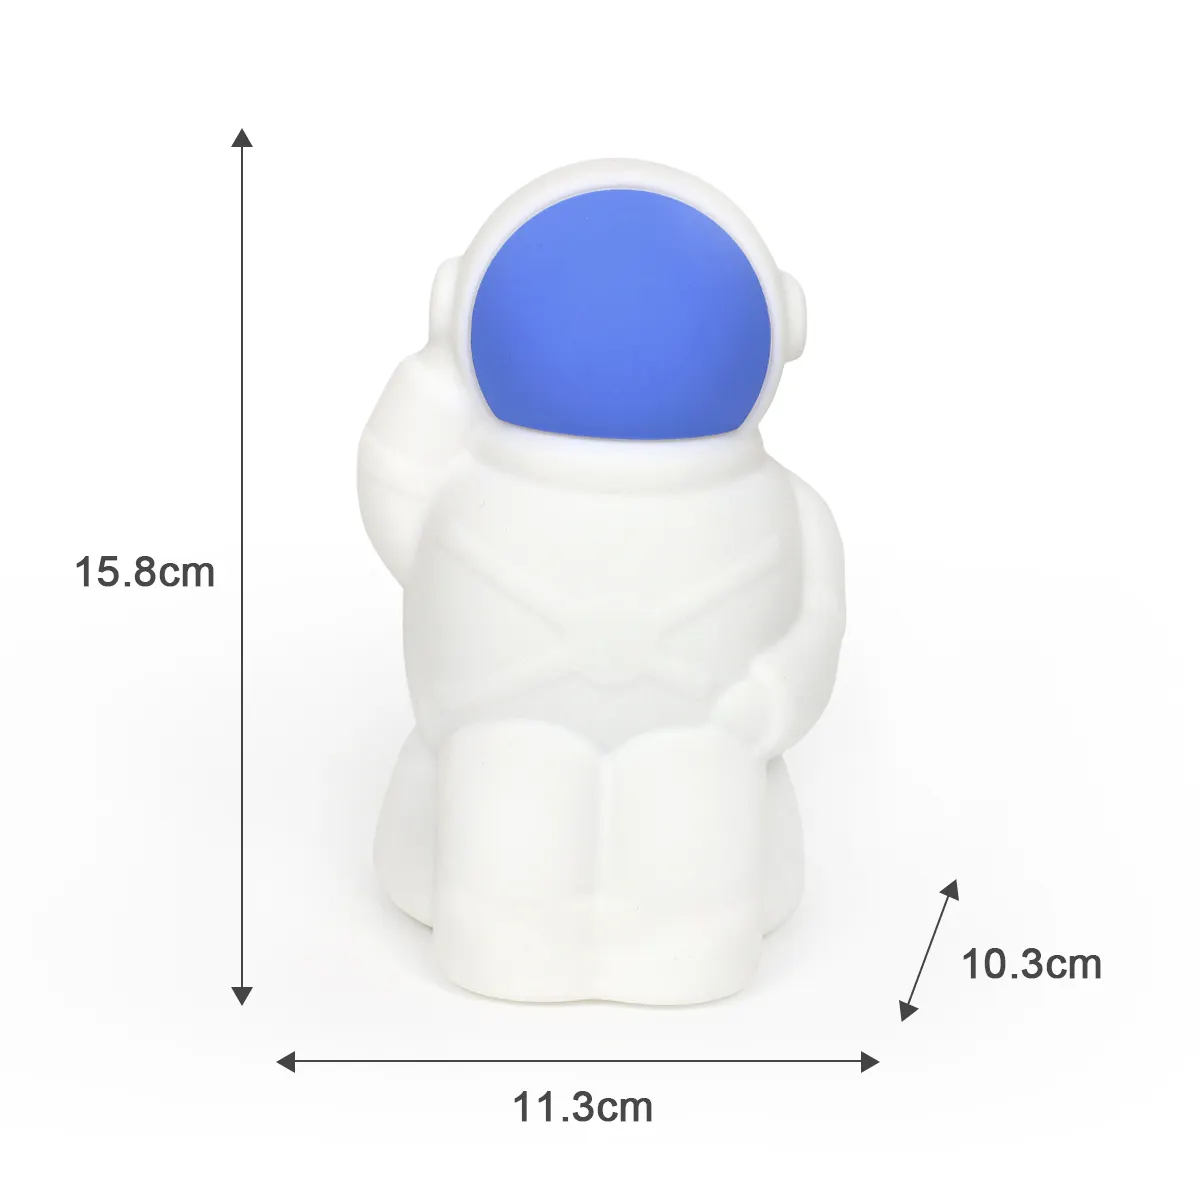 Night Lights for Touch Lamp Kids for Bedroom siliconeRGB it can change color motion sensorled night light